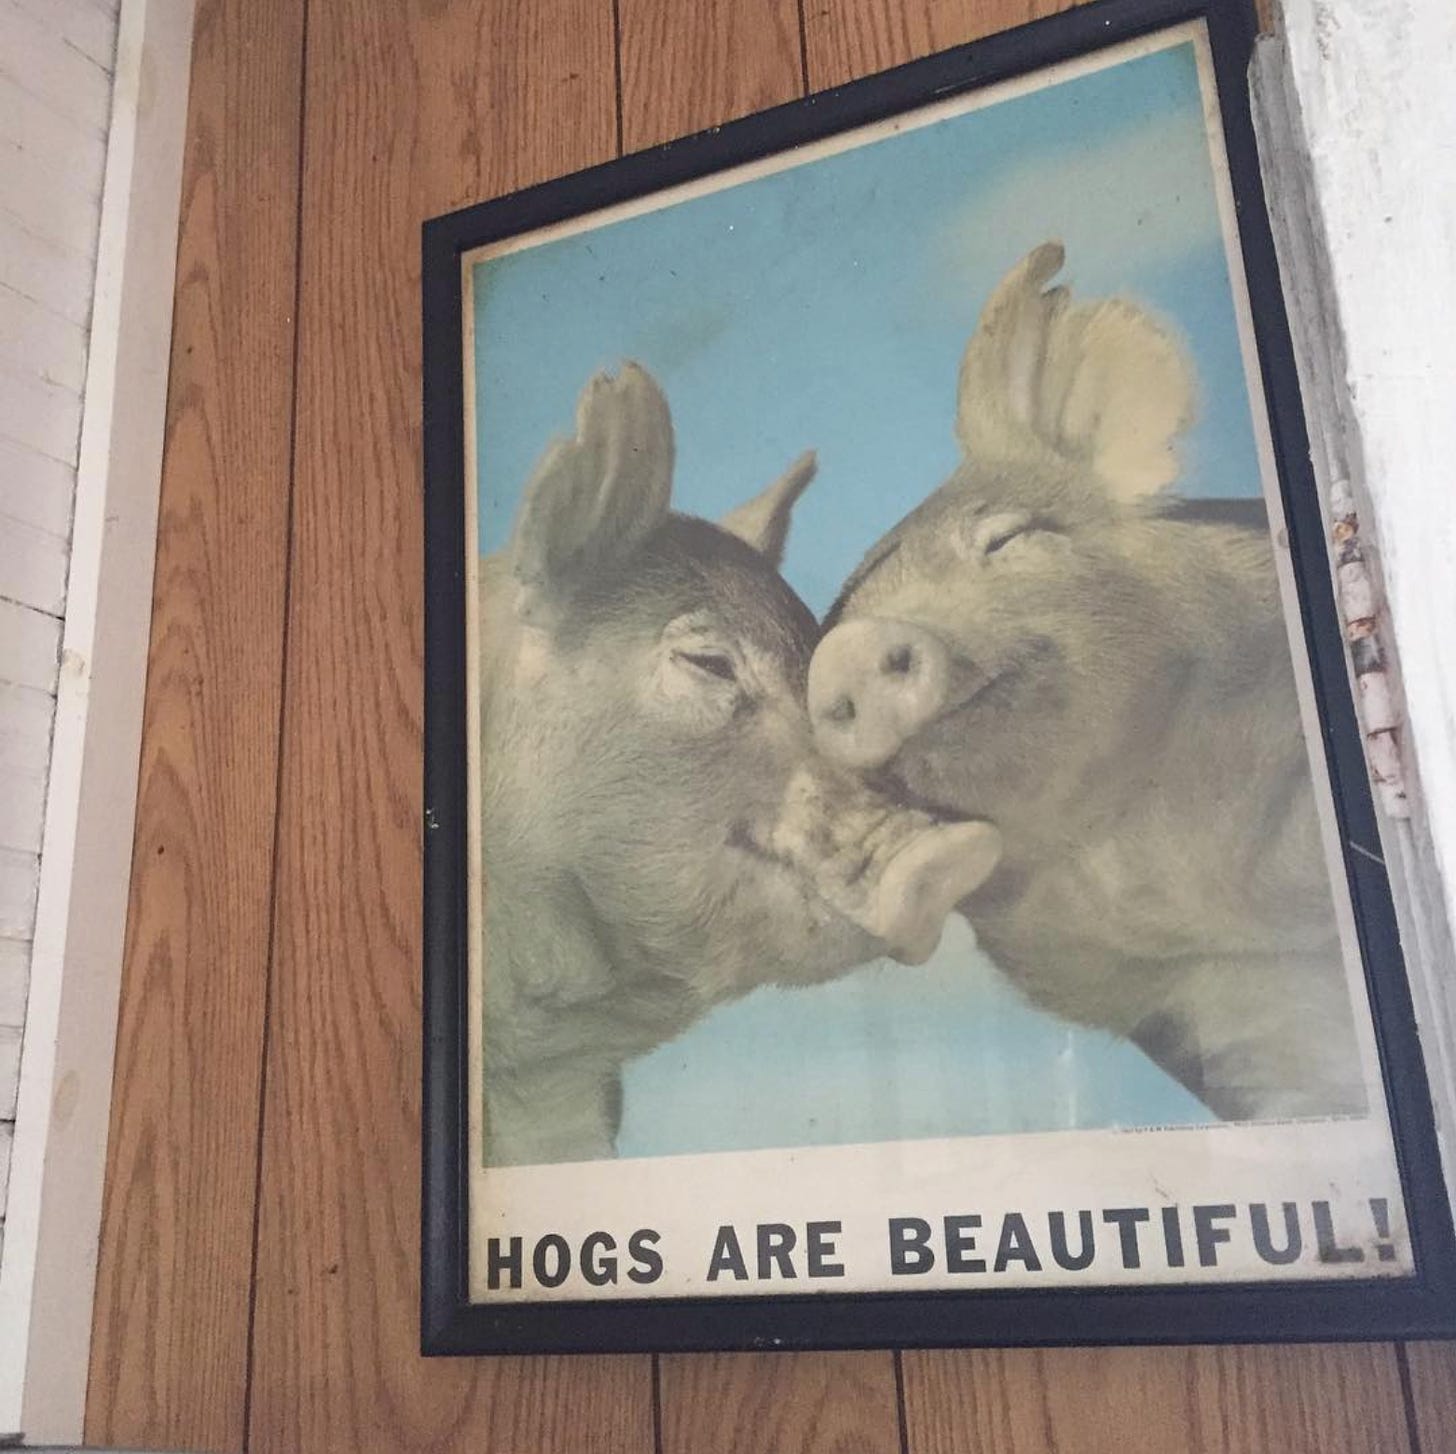 "hog's are beautiful" poster at b's barbecue